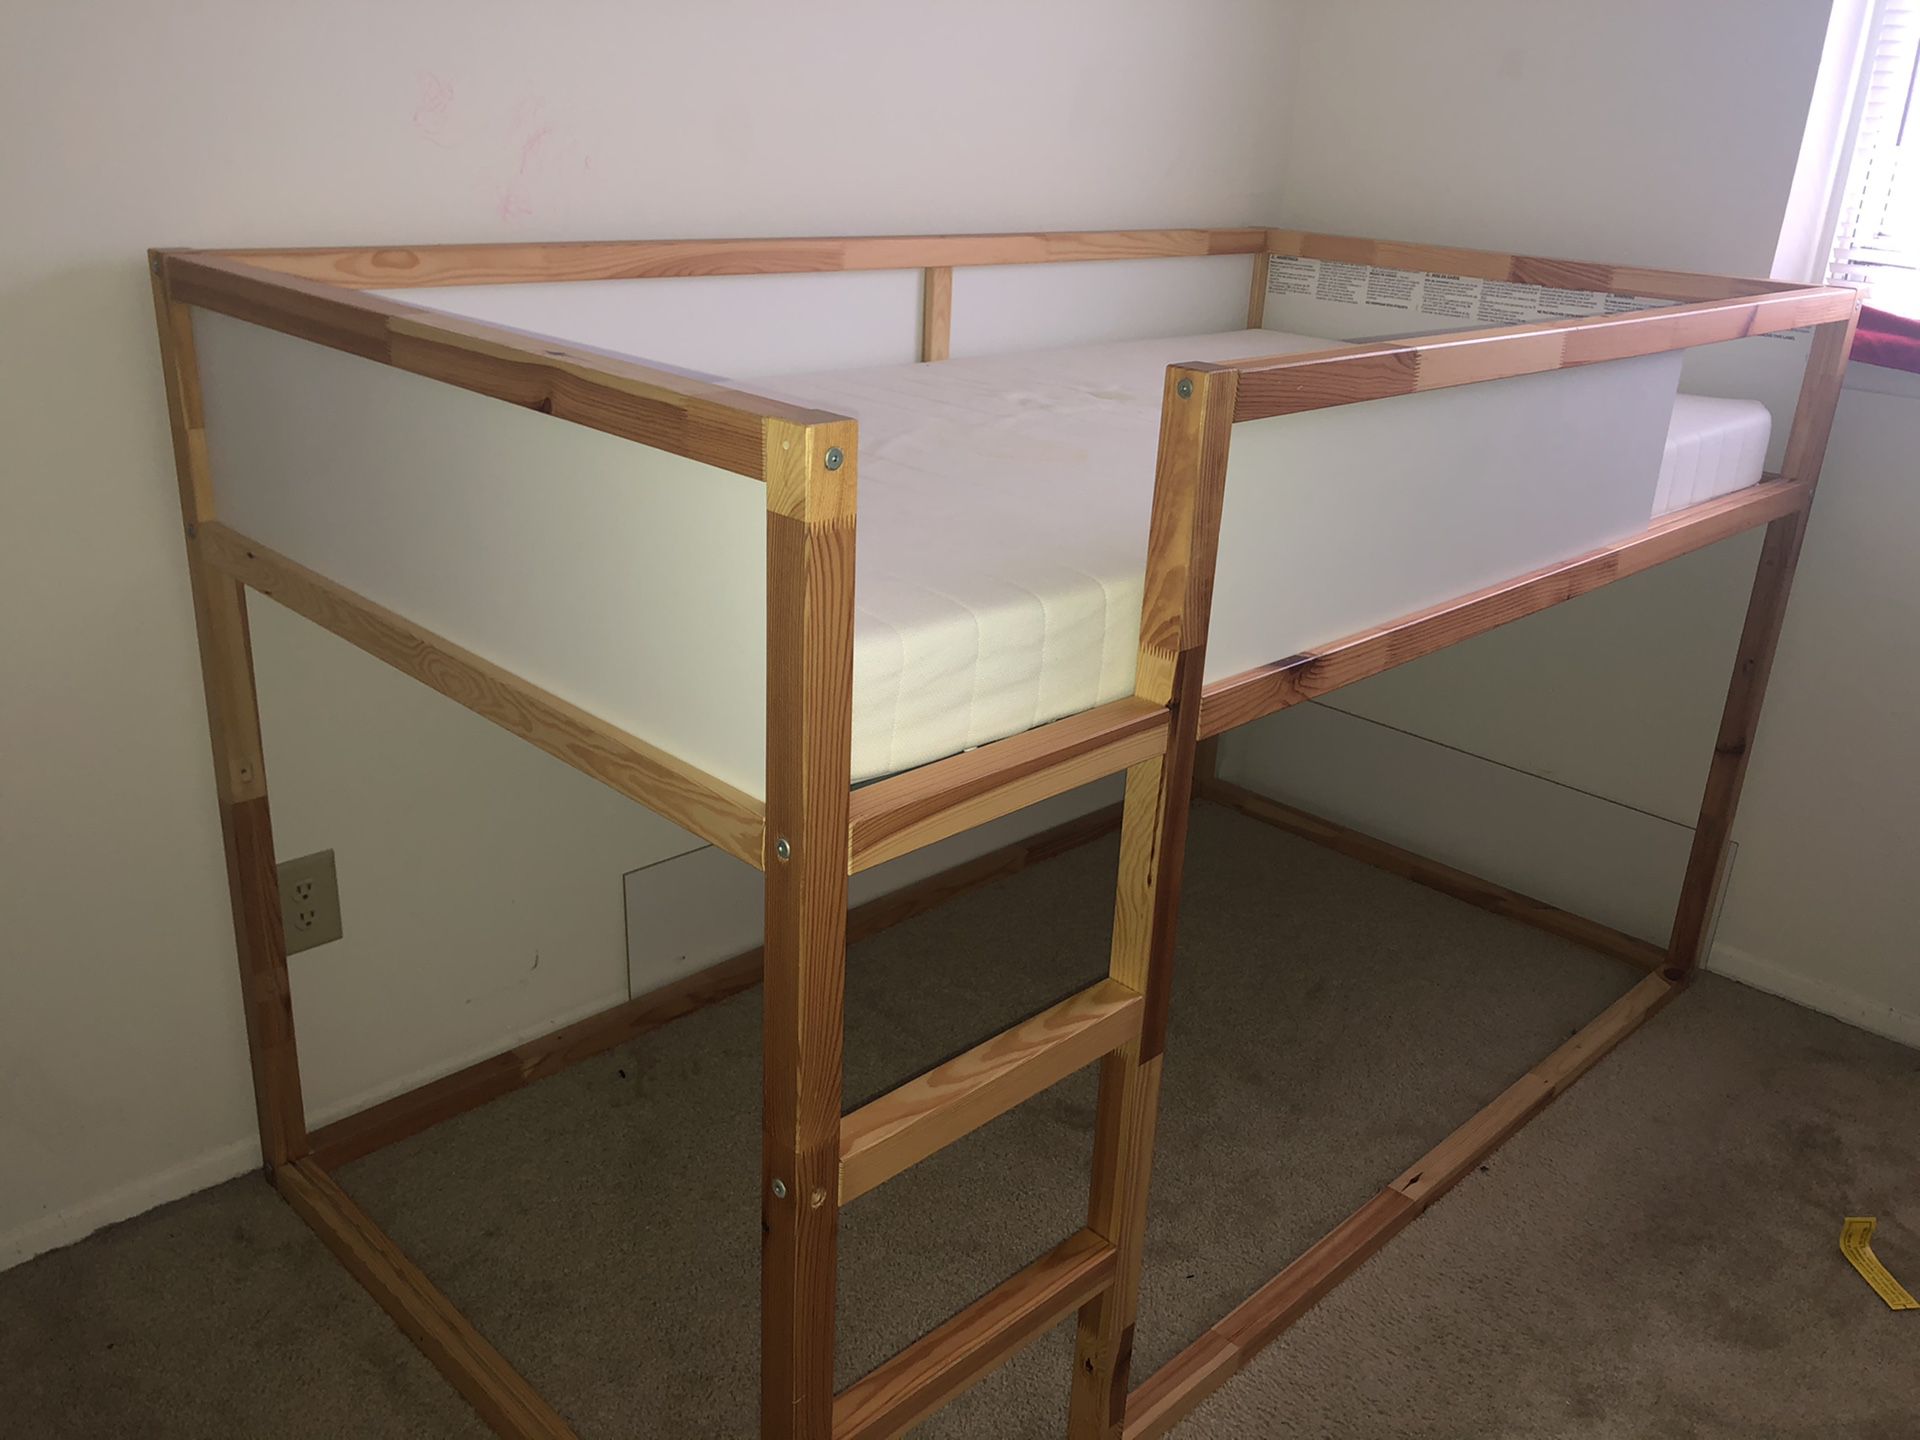 Kids twin size bed.